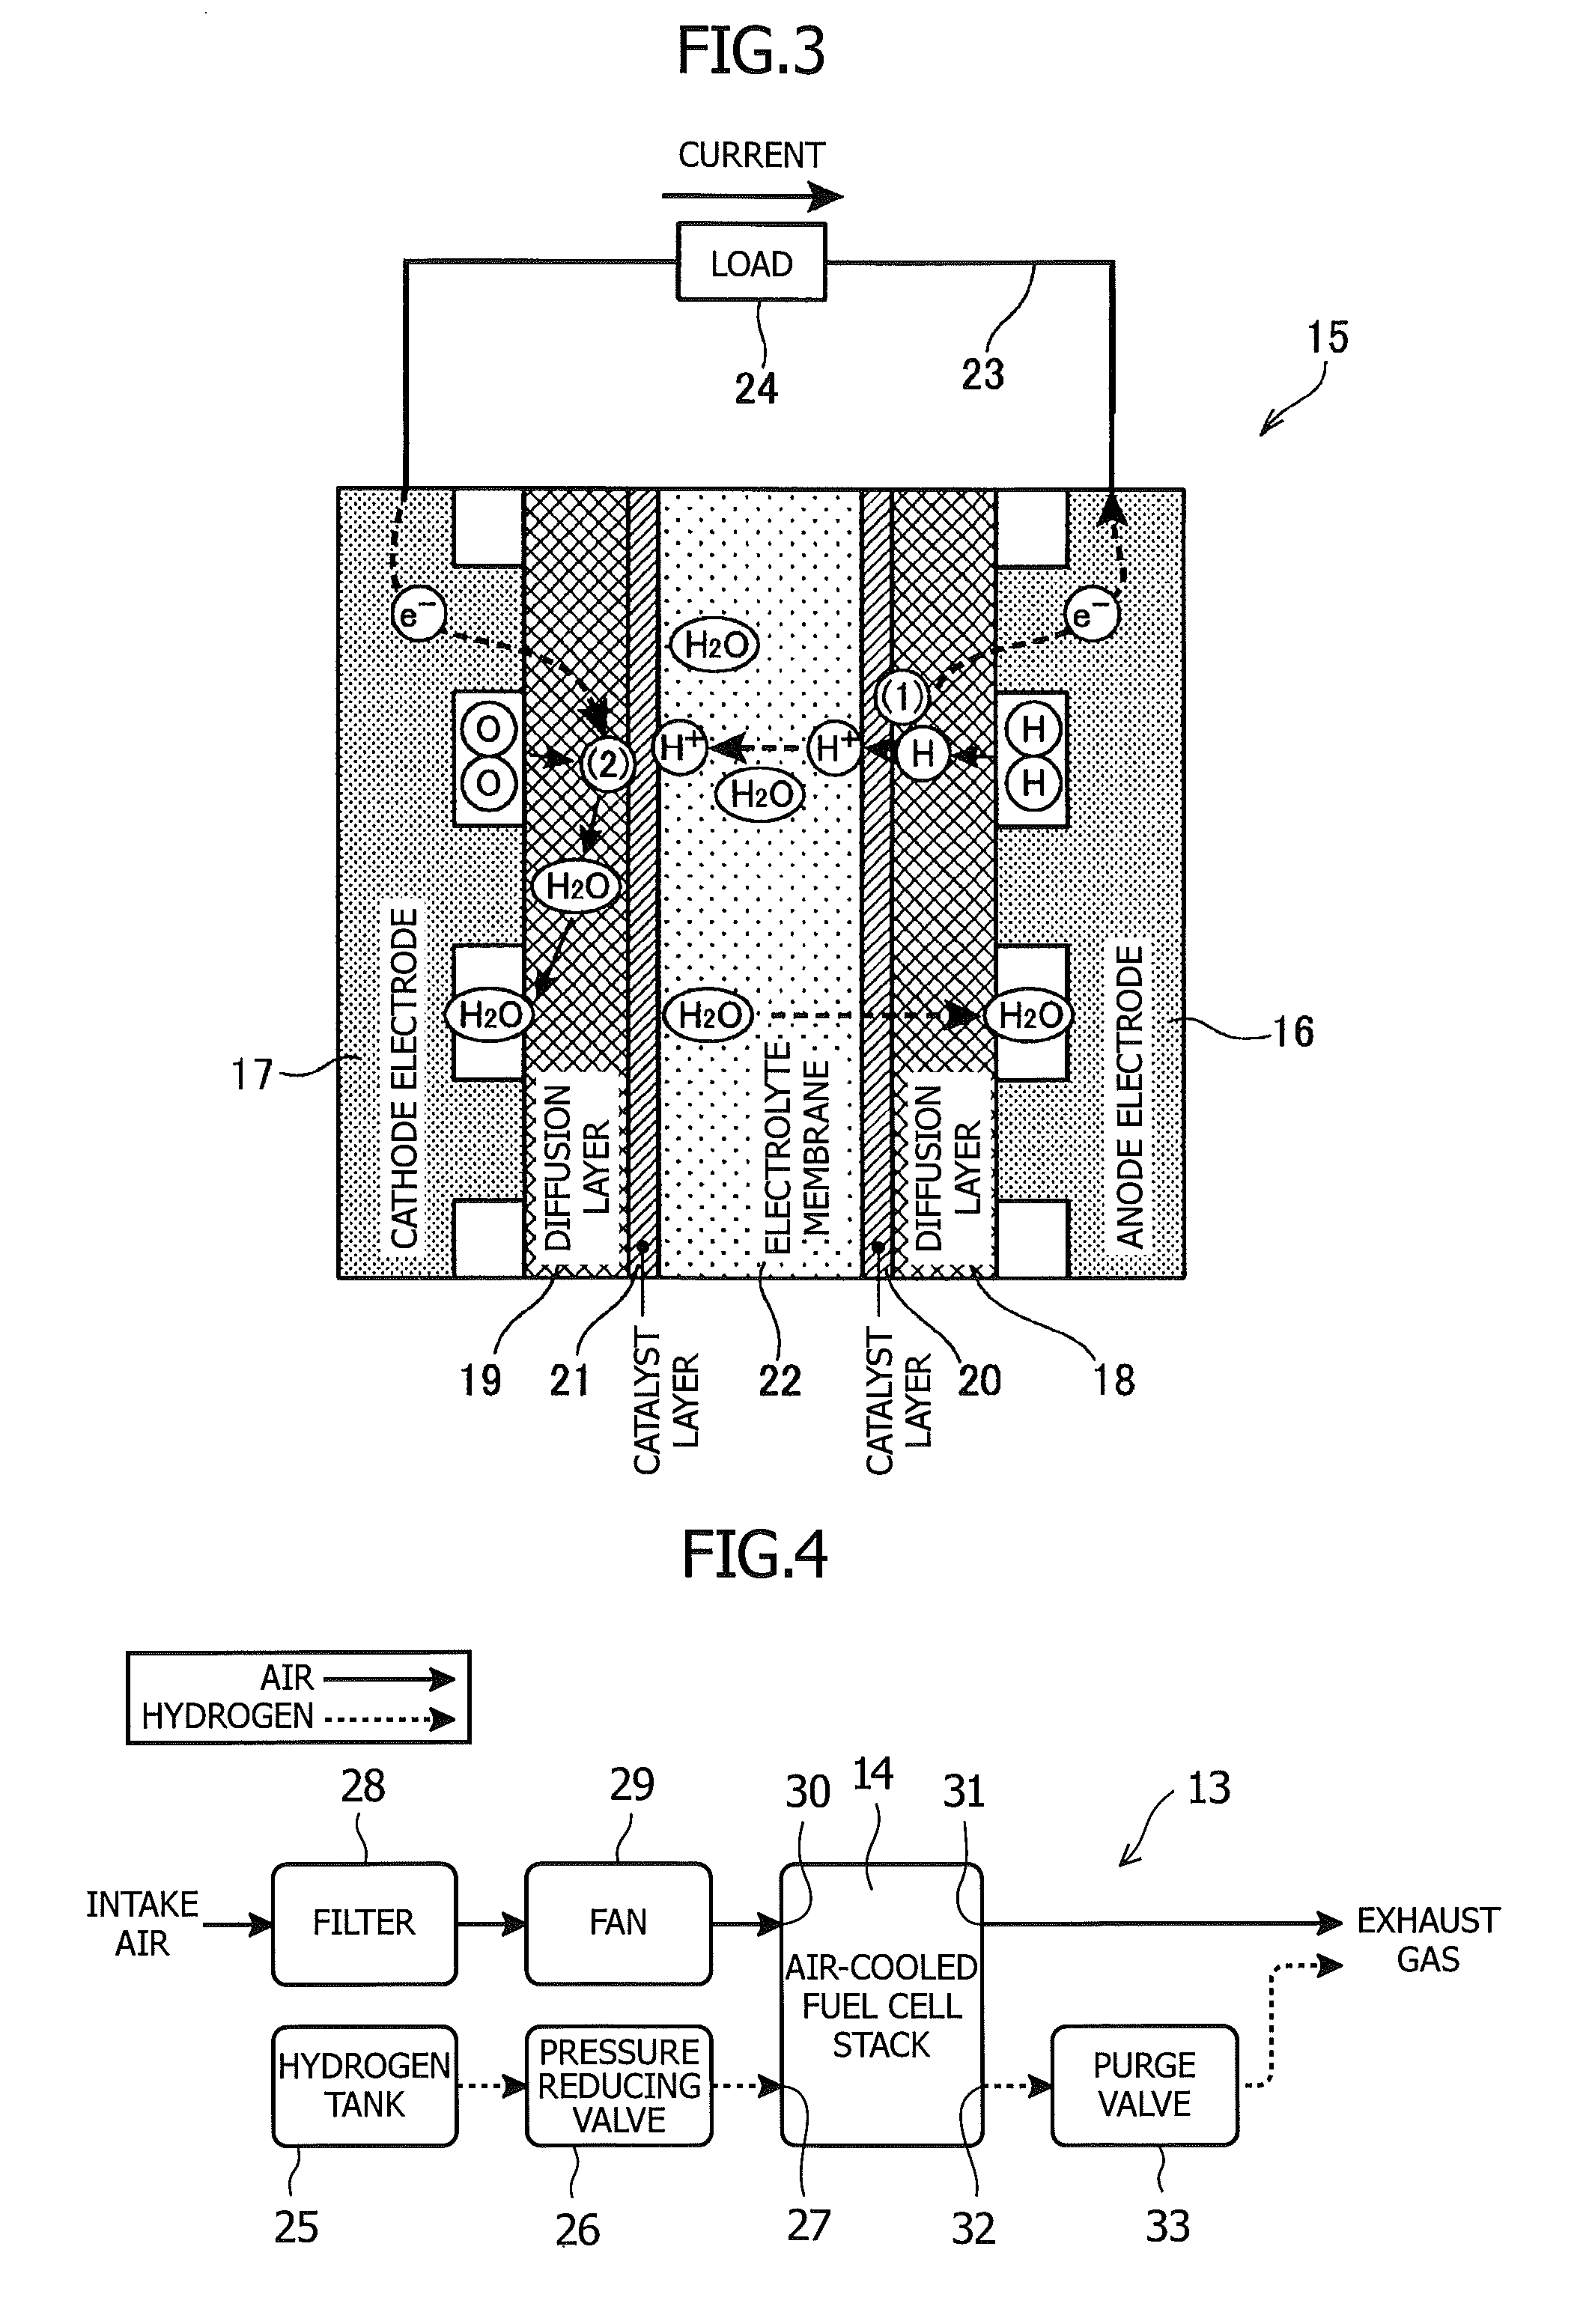 Exhaust apparatus of air-cooled fuel cell vehicle